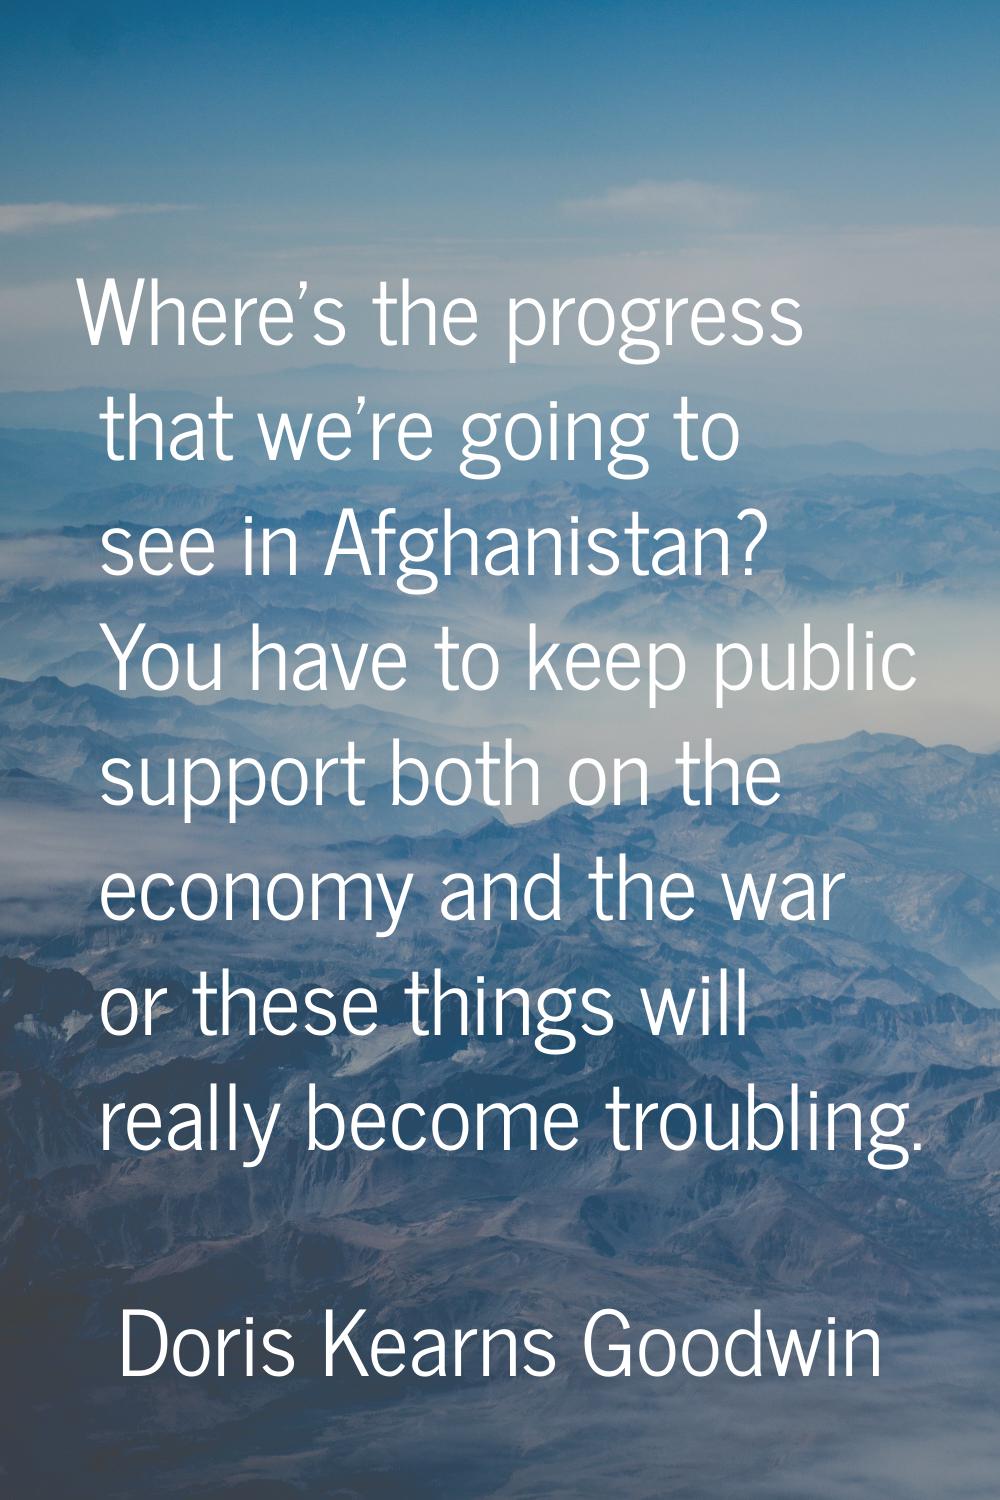 Where's the progress that we're going to see in Afghanistan? You have to keep public support both o